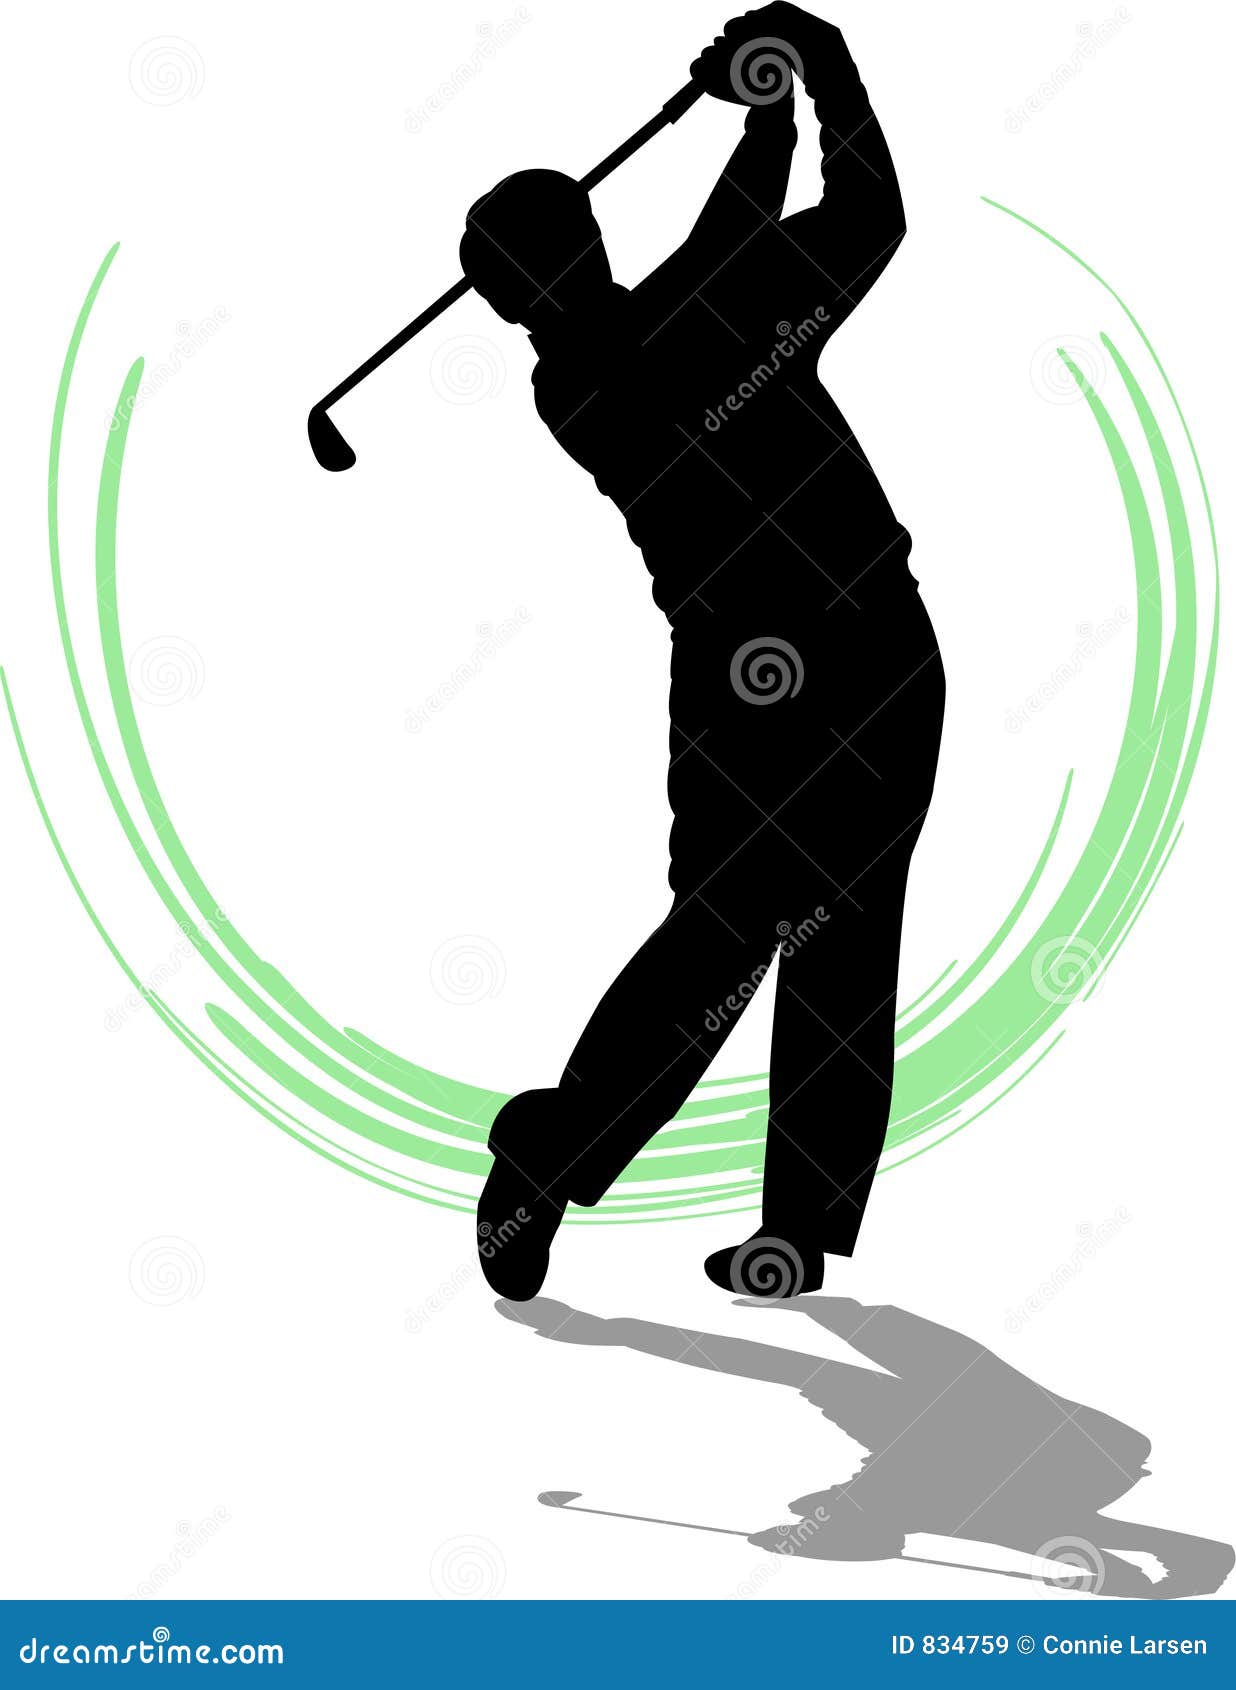 golf clipart free download - photo #22